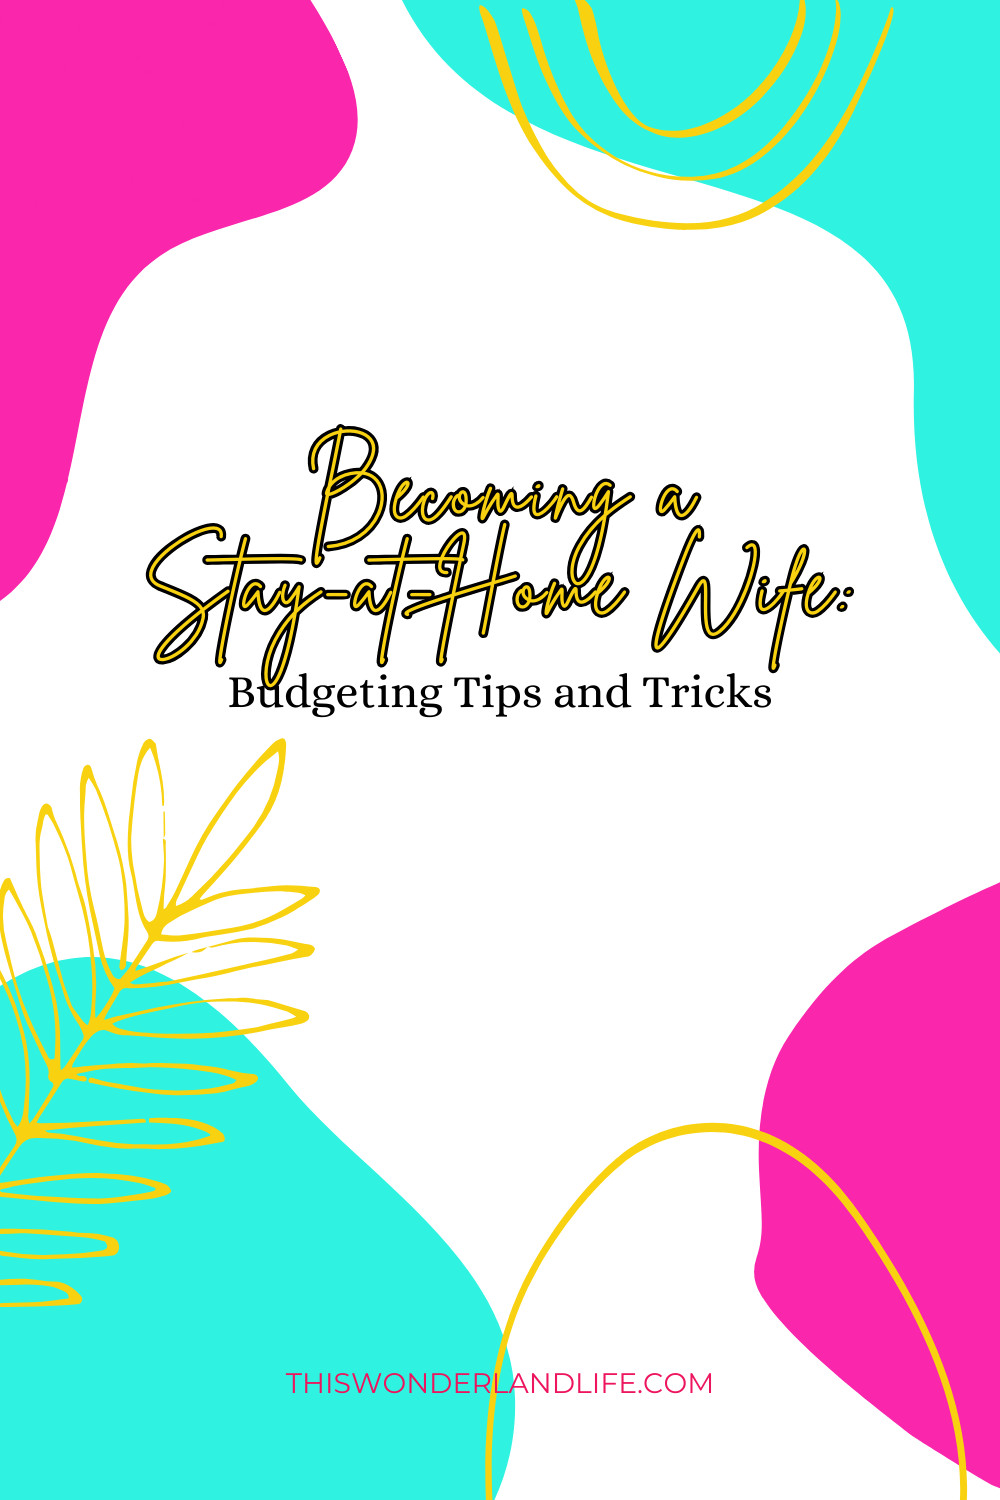 Becoming a Stay-At-Home Wife: Budgeting Tips and Tricks